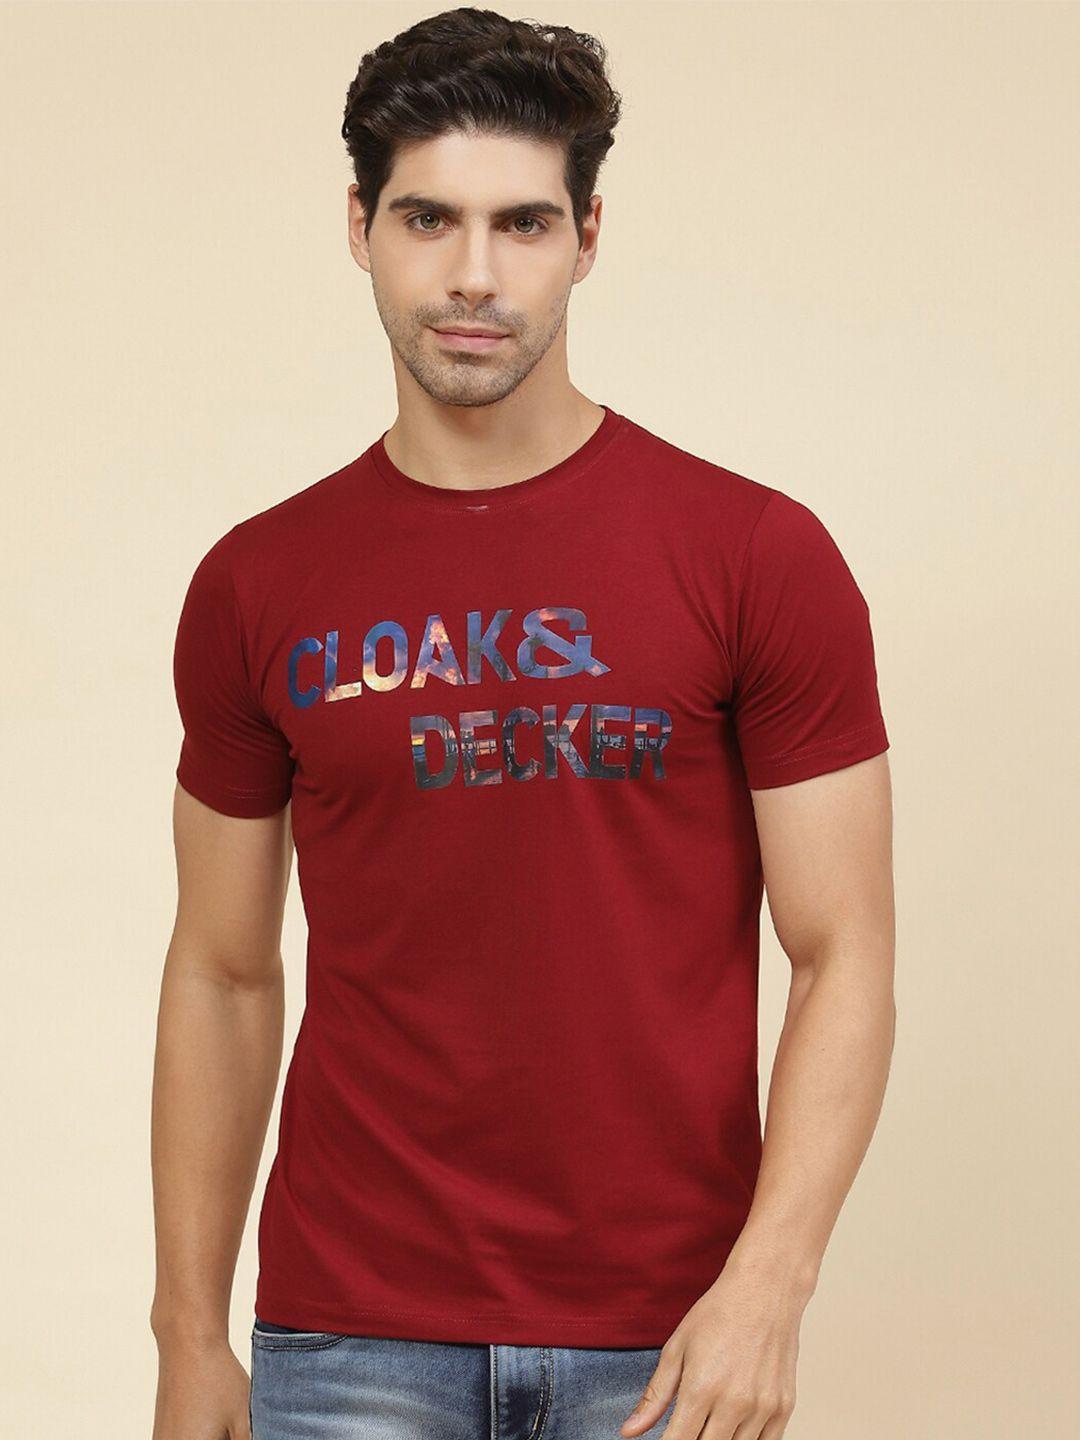 cloak & decker by monte carlo typography printed cotton t-shirt